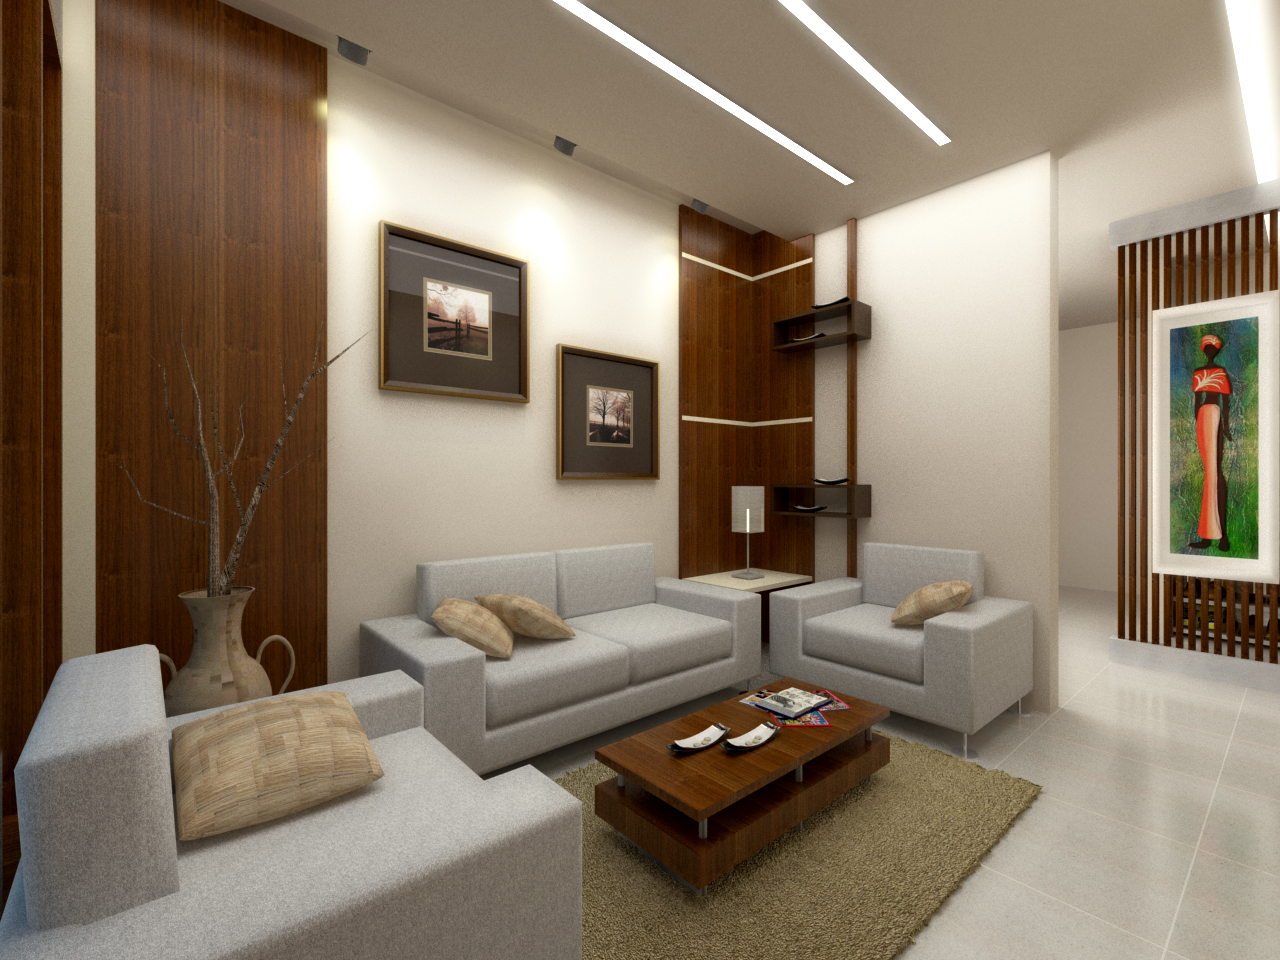 Interior Project – Interior House in Lampung